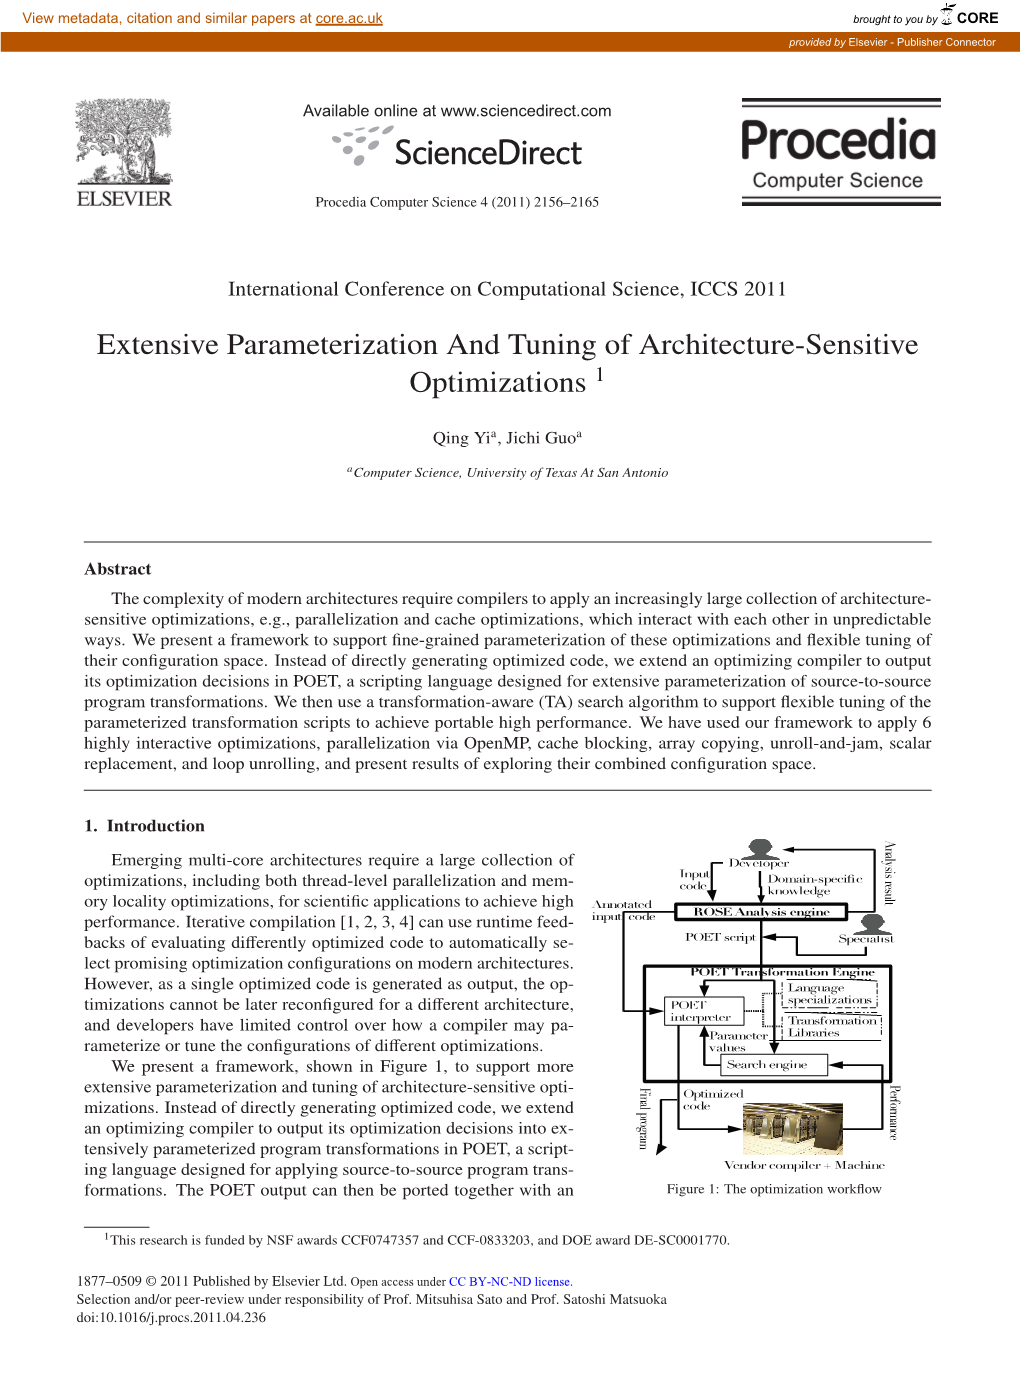 Extensive Parameterization and Tuning of Architecture-Sensitive Optimizations 1